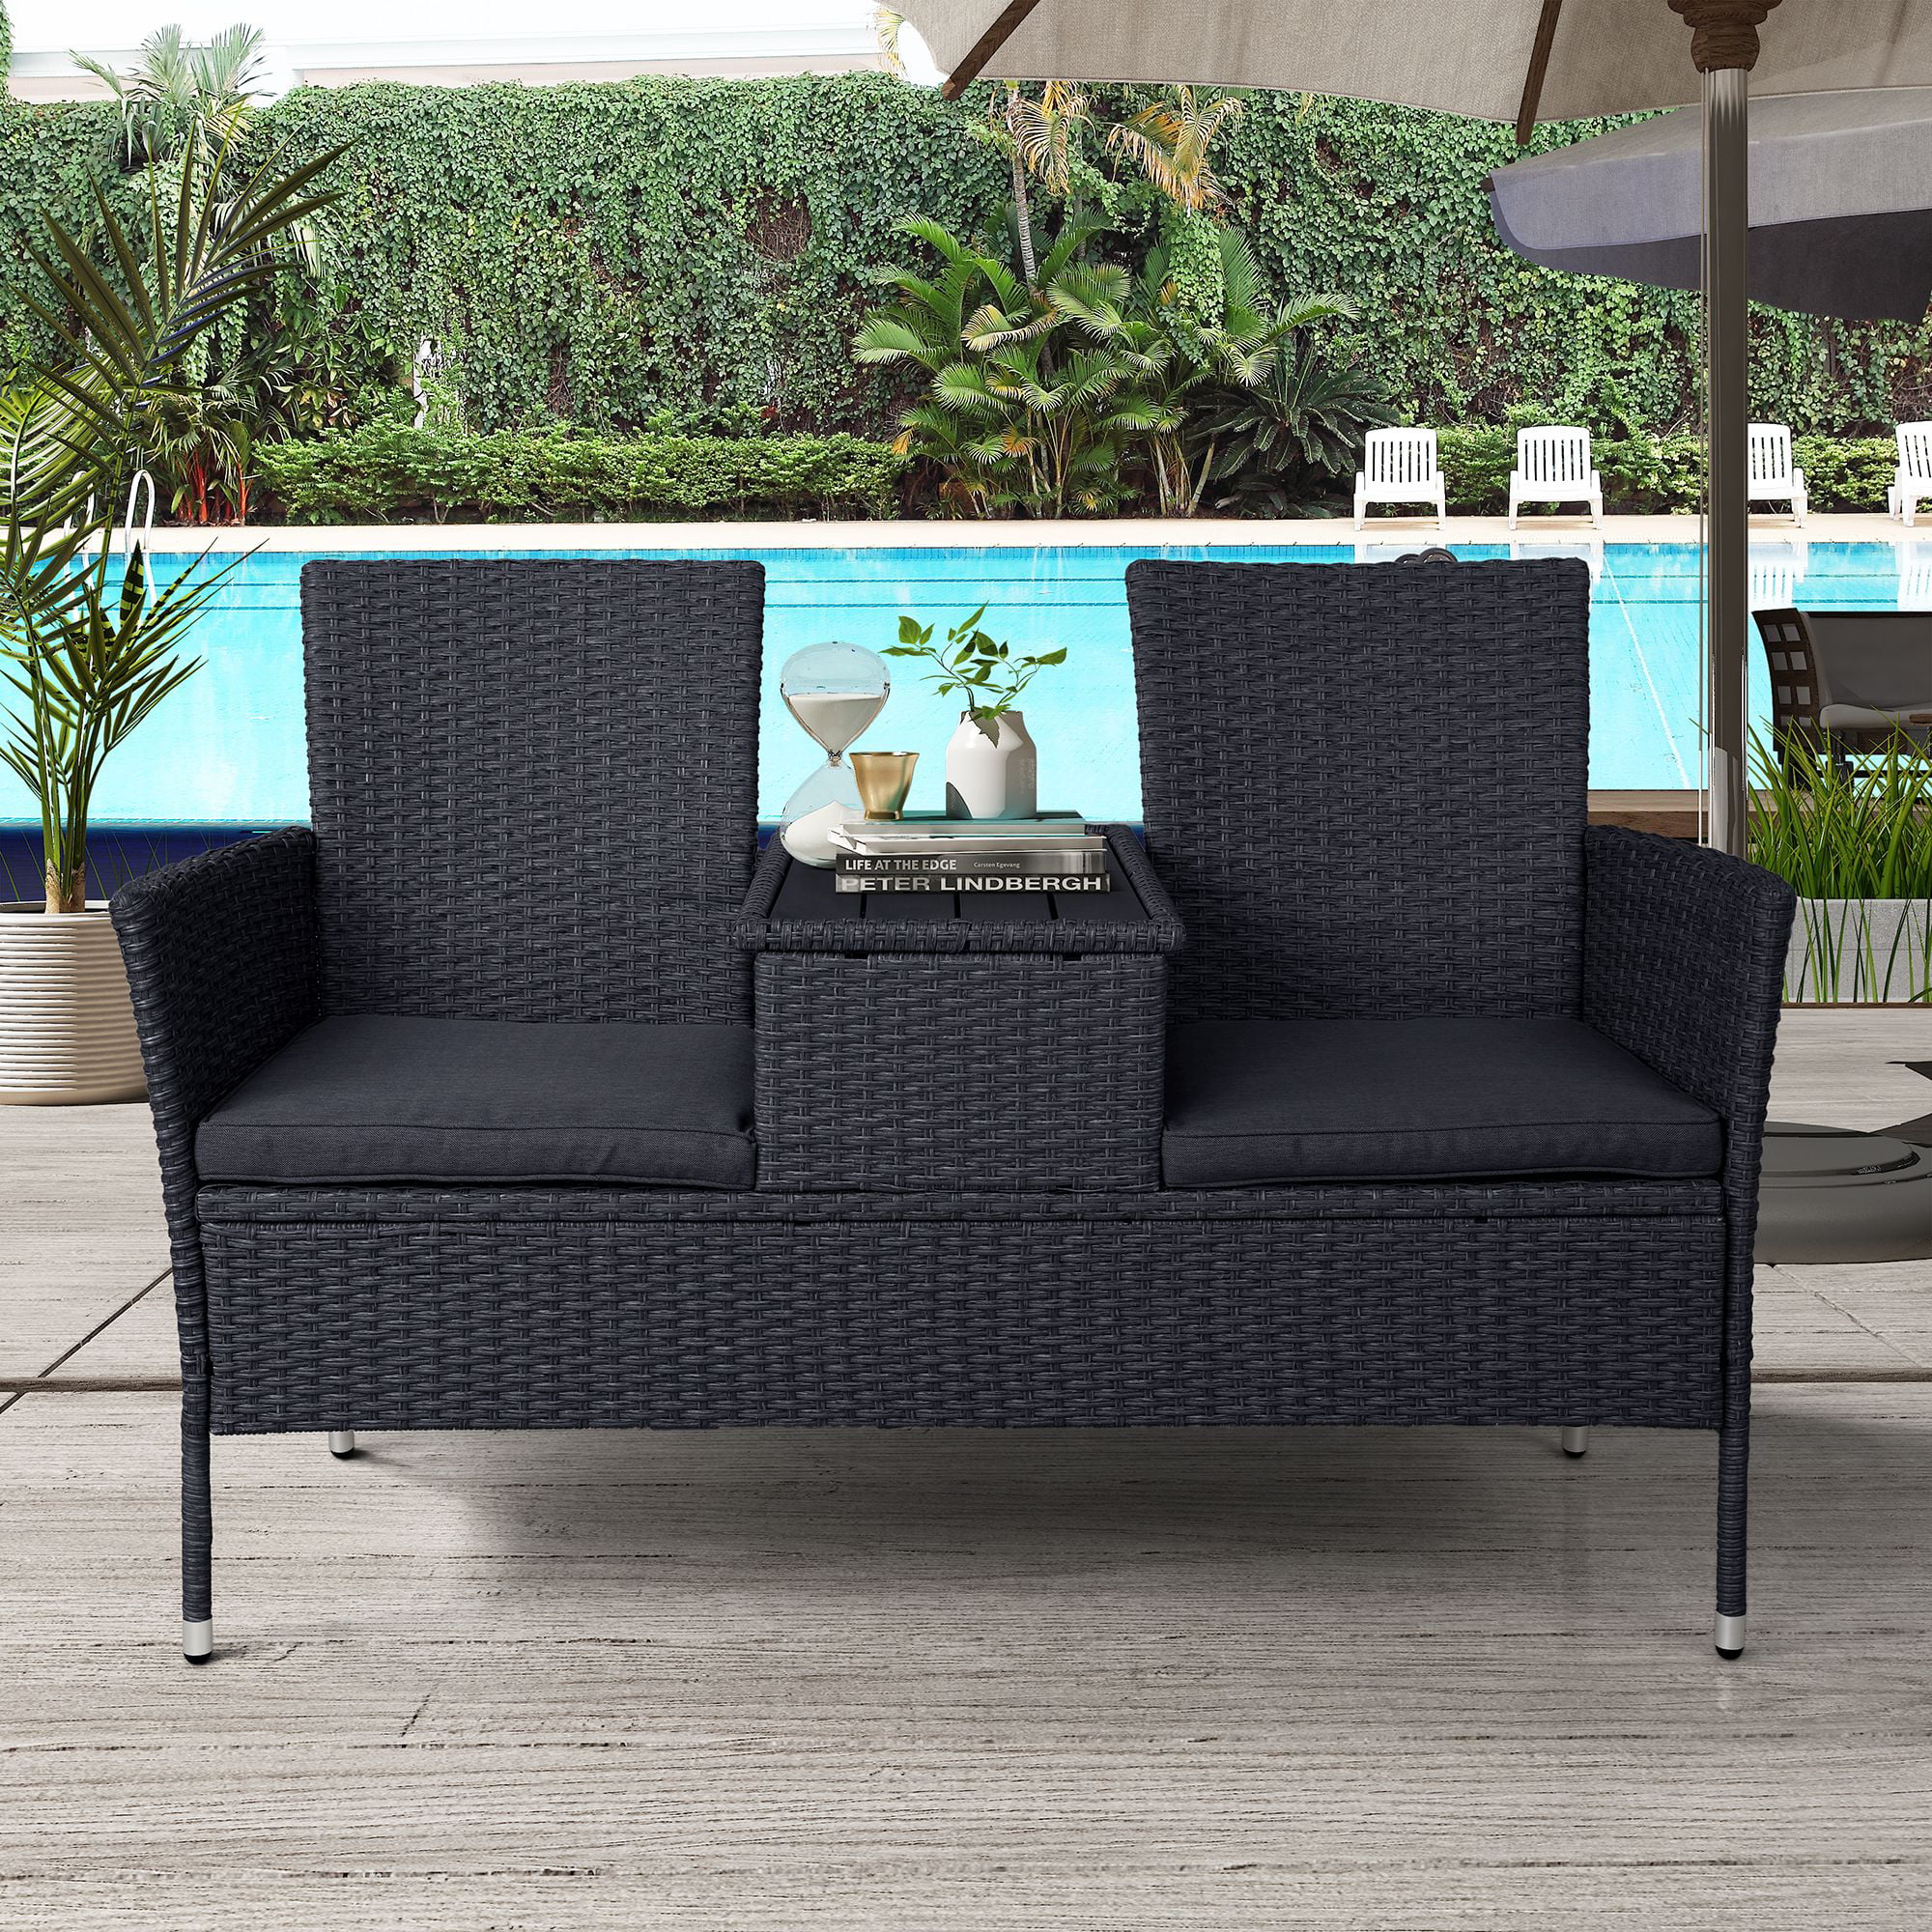 Patio Furniture Sets Clearance, Patio Wicker Conversation Set with Cushions&Table, Outdoor ...